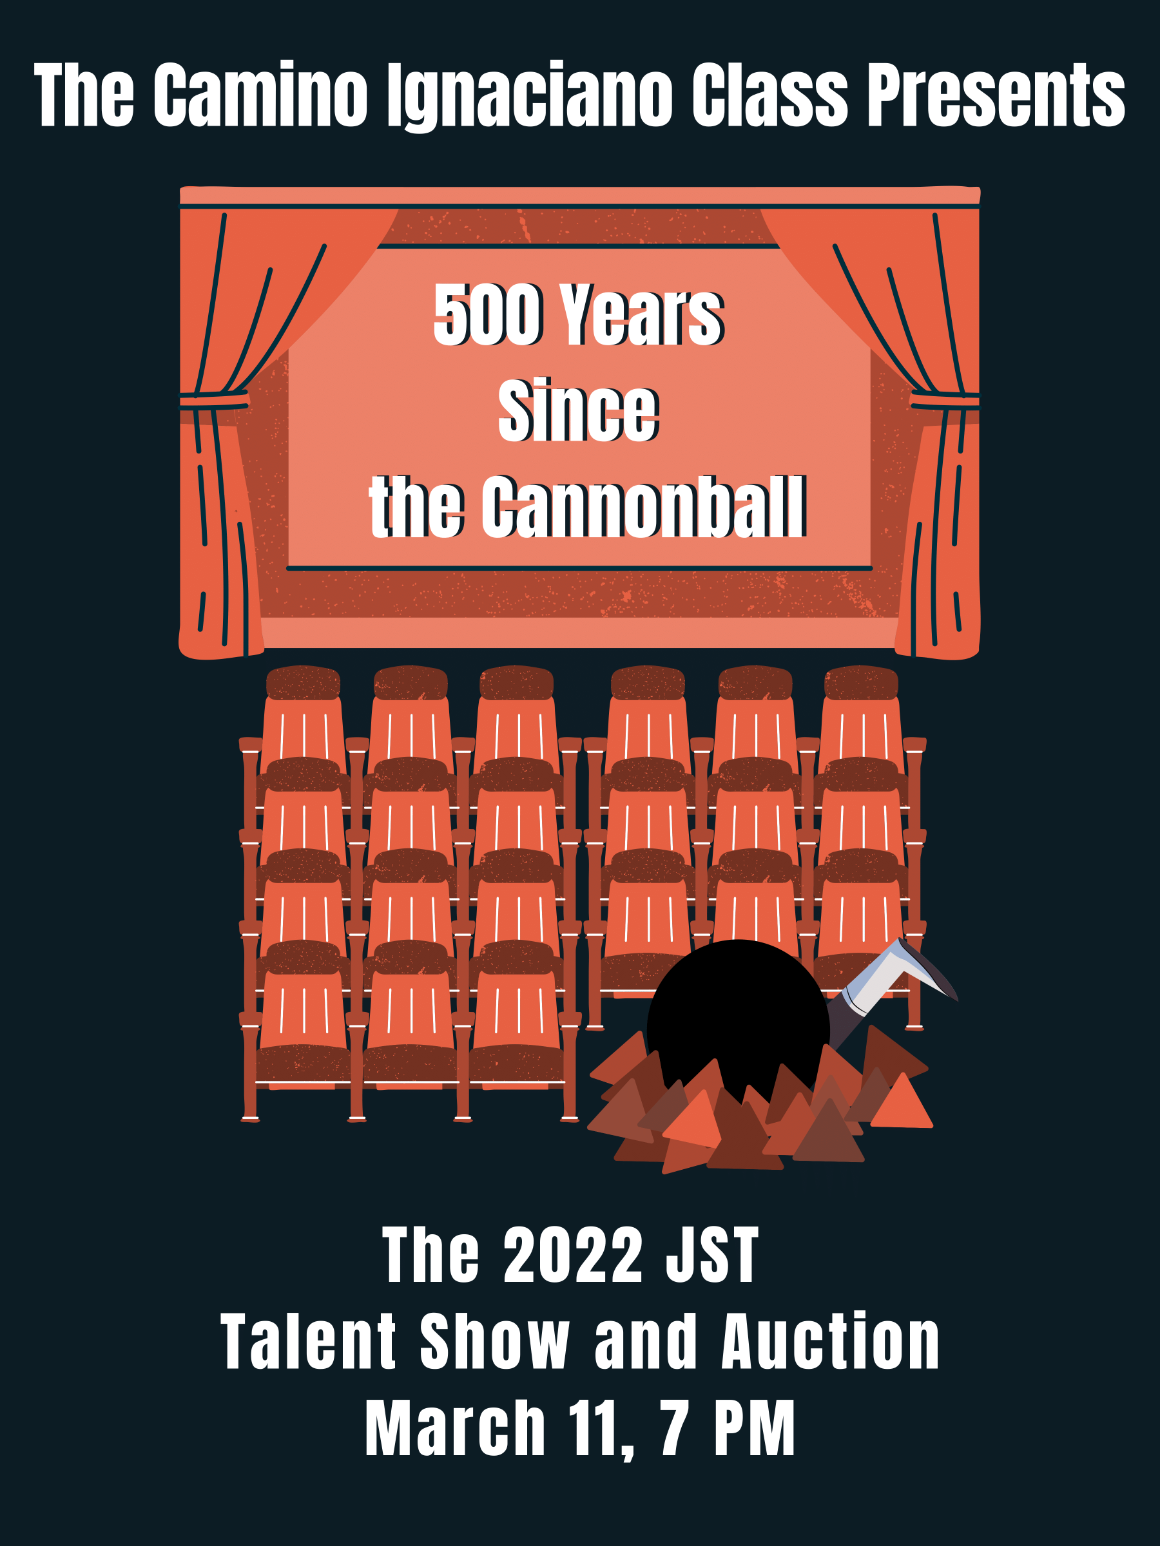 Announcement for the JST Talent Show being held on March 11 at 7pm PST